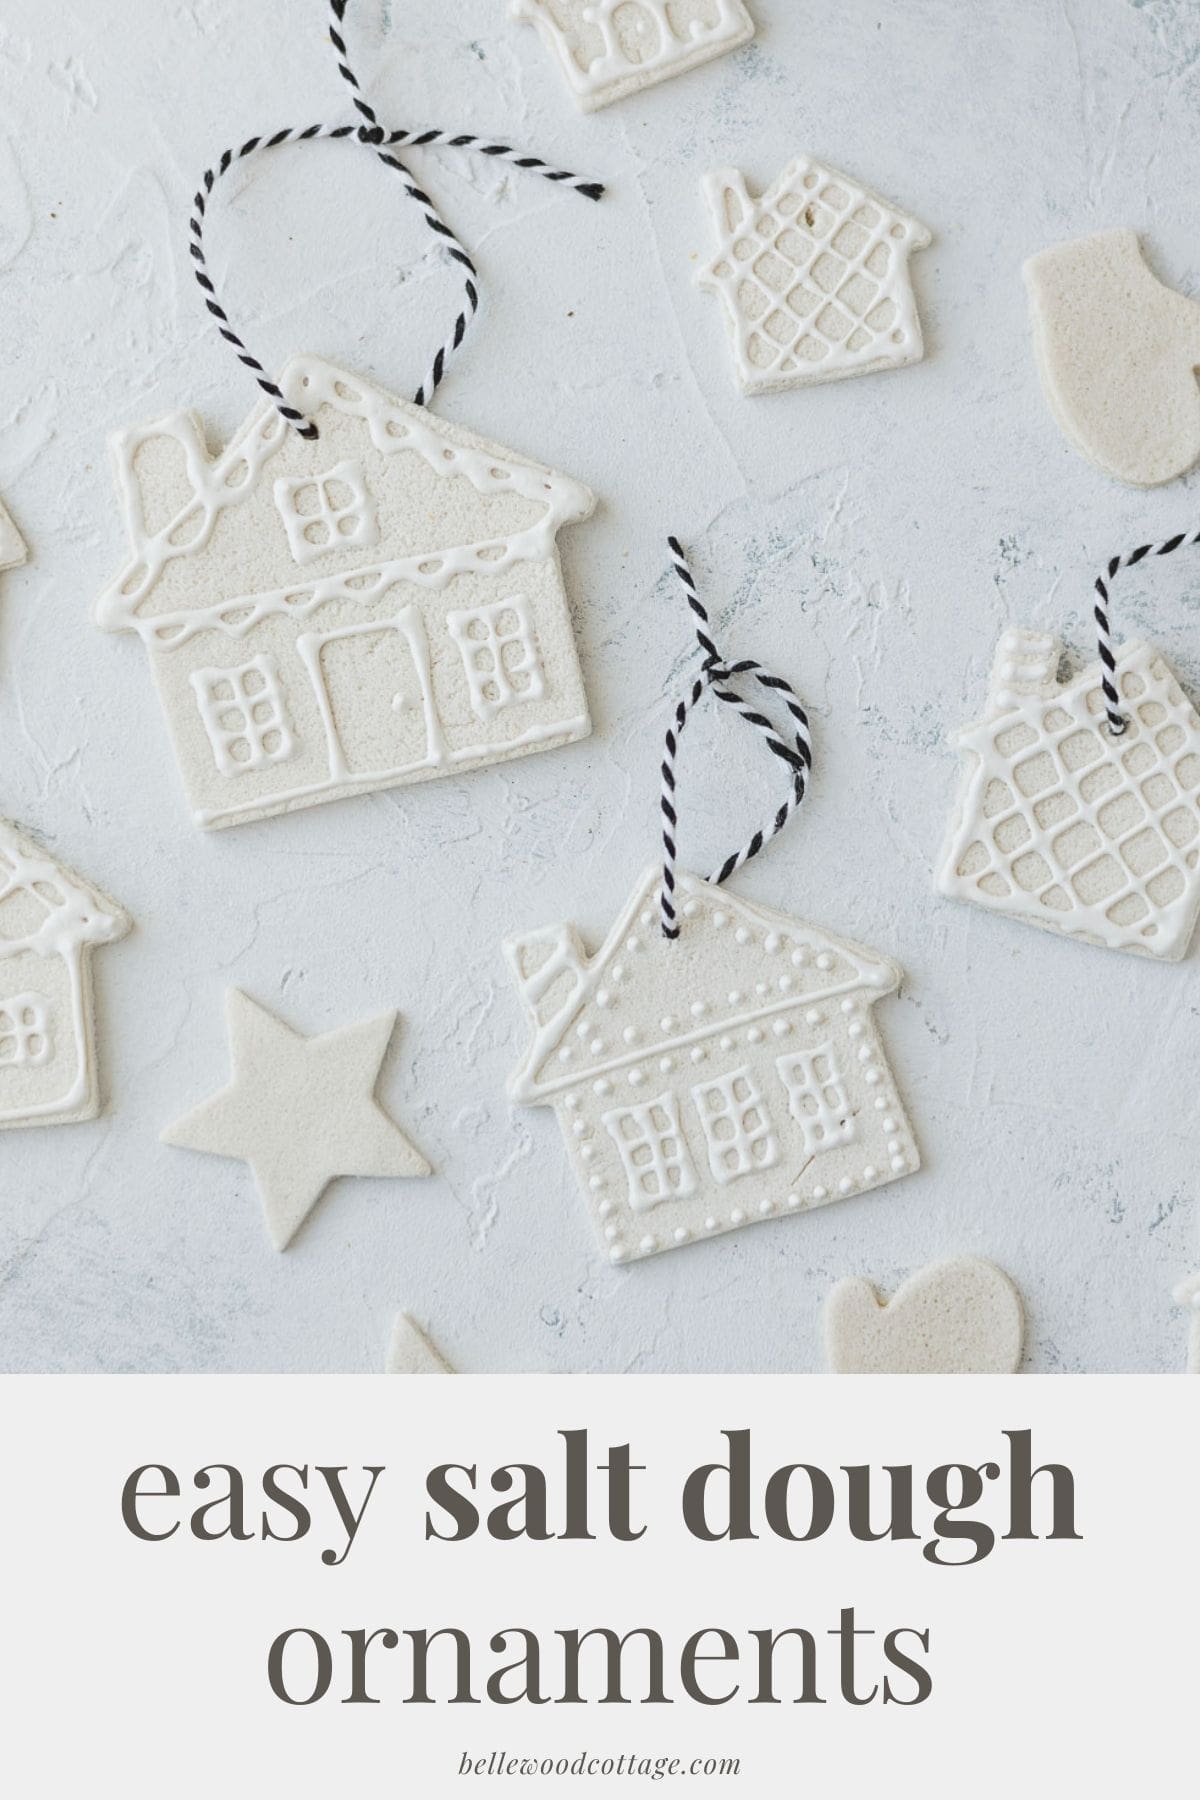 Salt dough houses decorated with white puffy paint with the words, "Easy Salt Dough Ornaments".